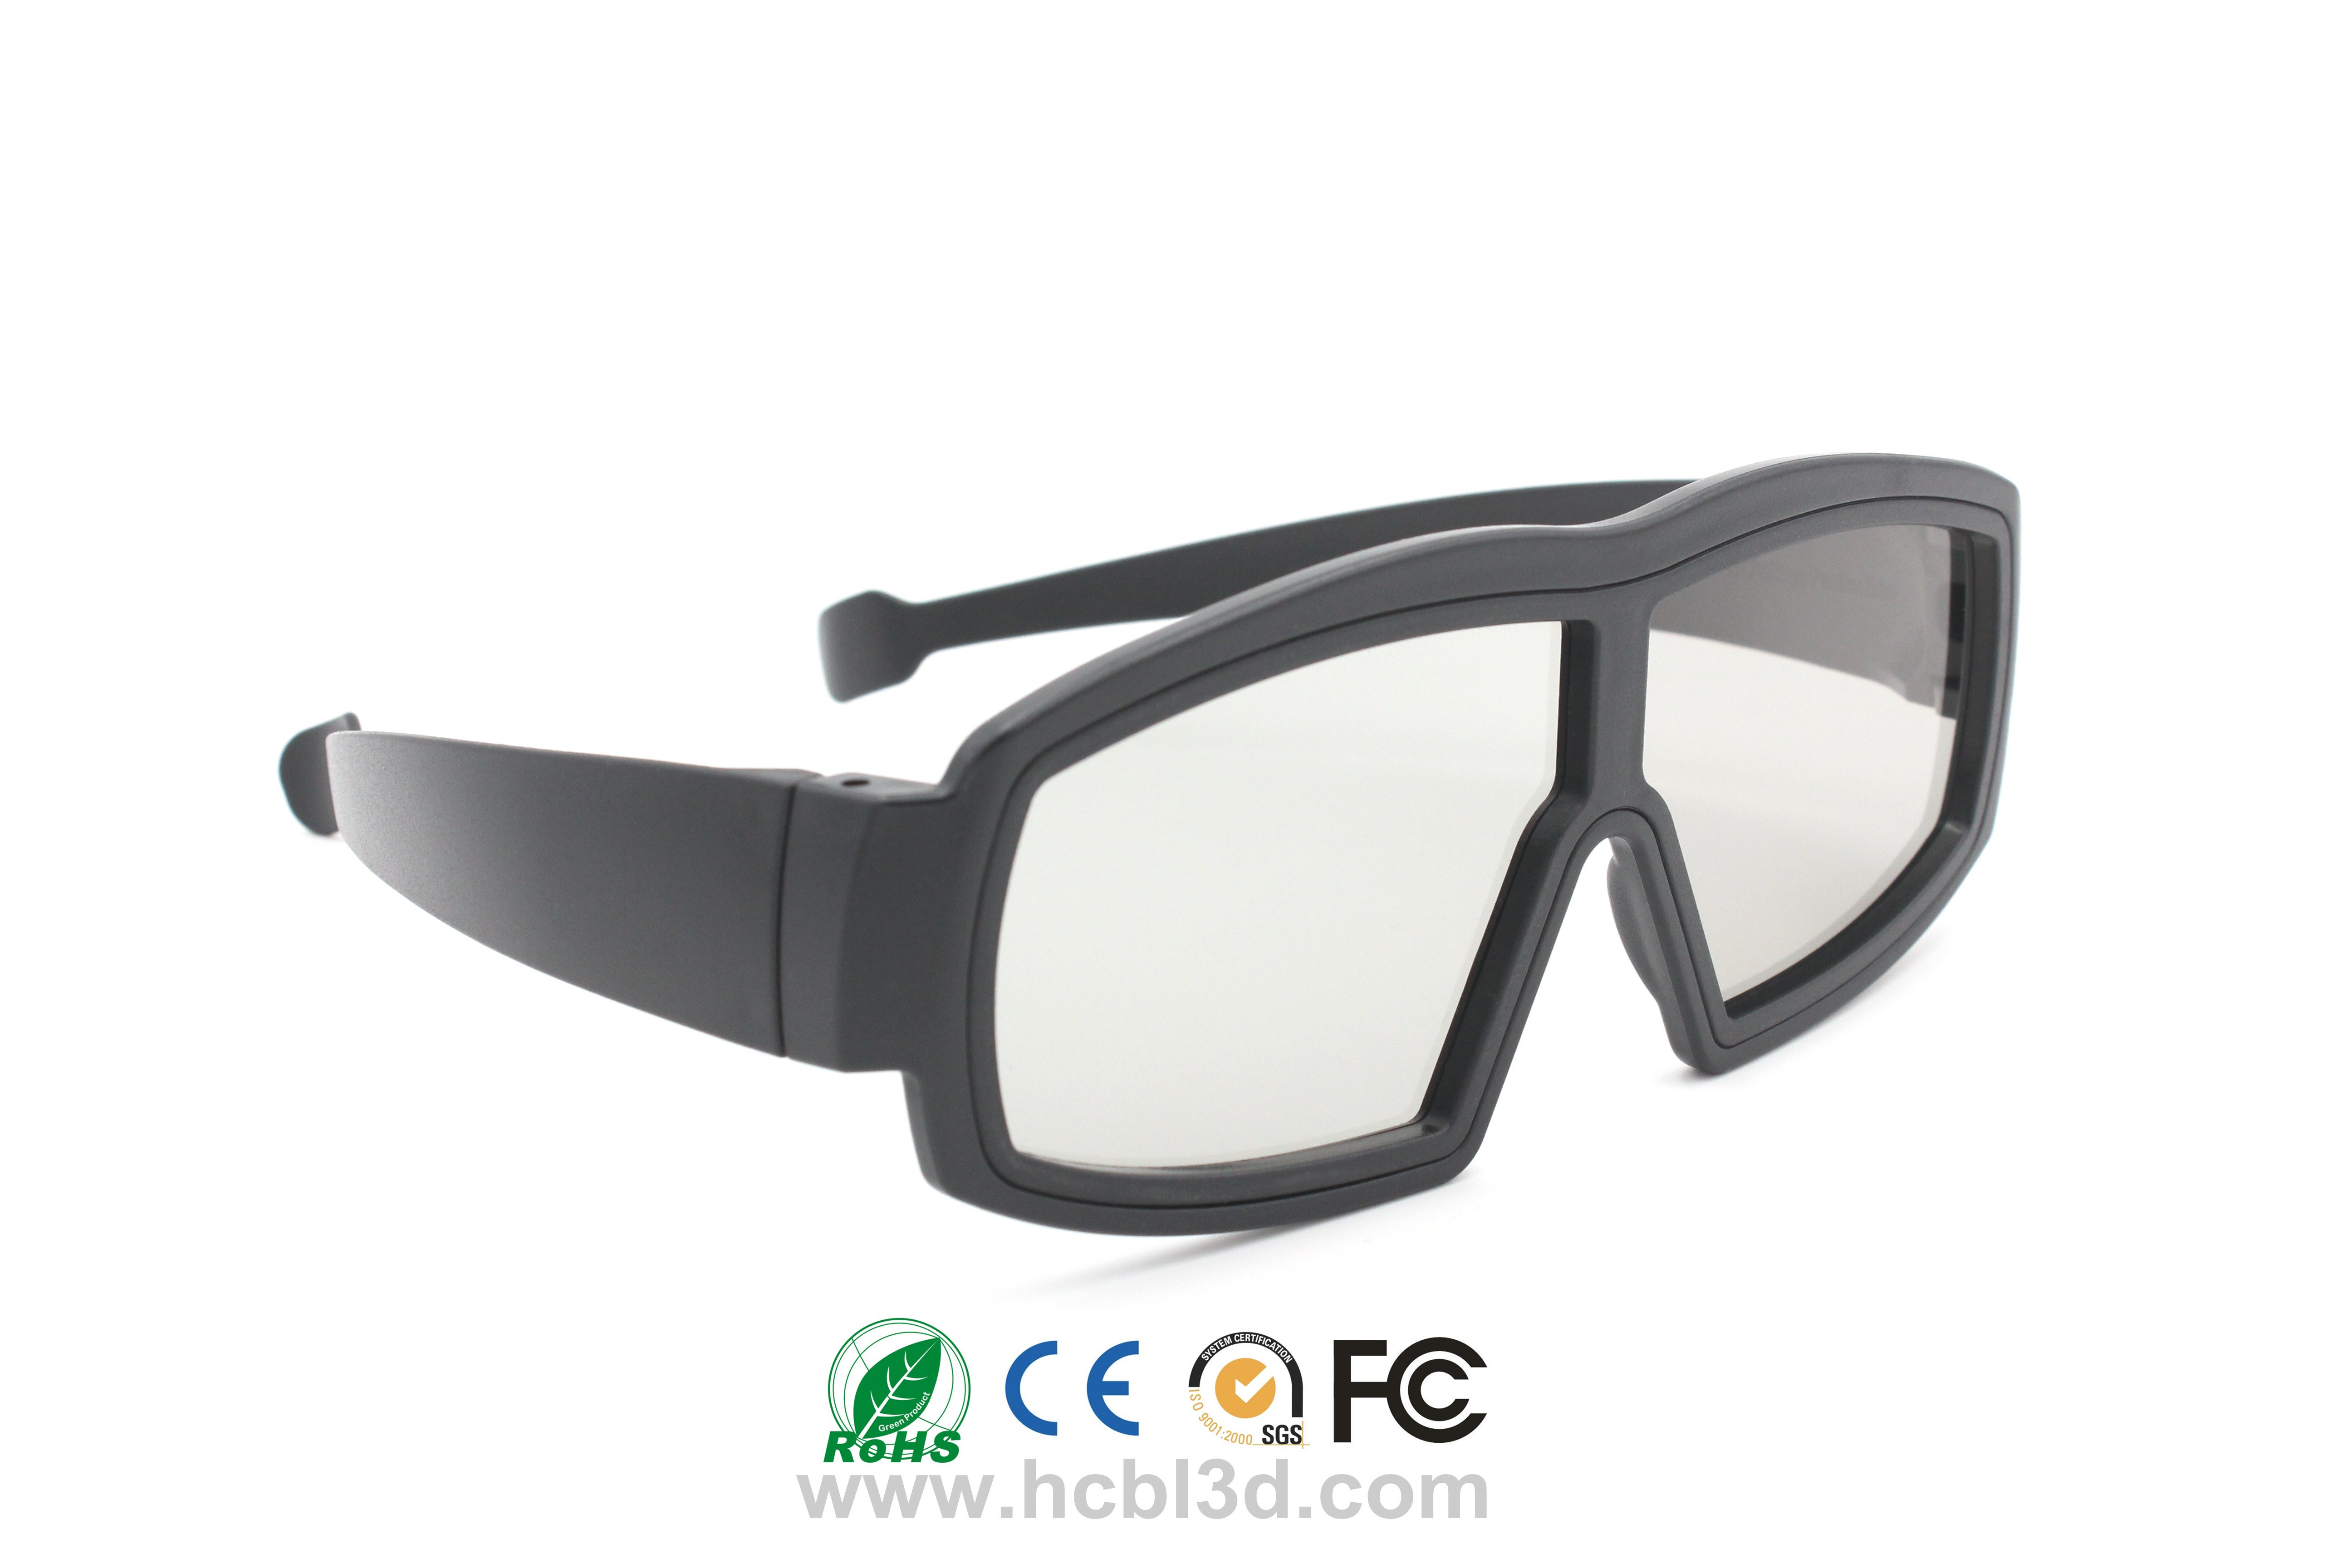 Linear 3D glasses with ABS frame for Comfortable large frame